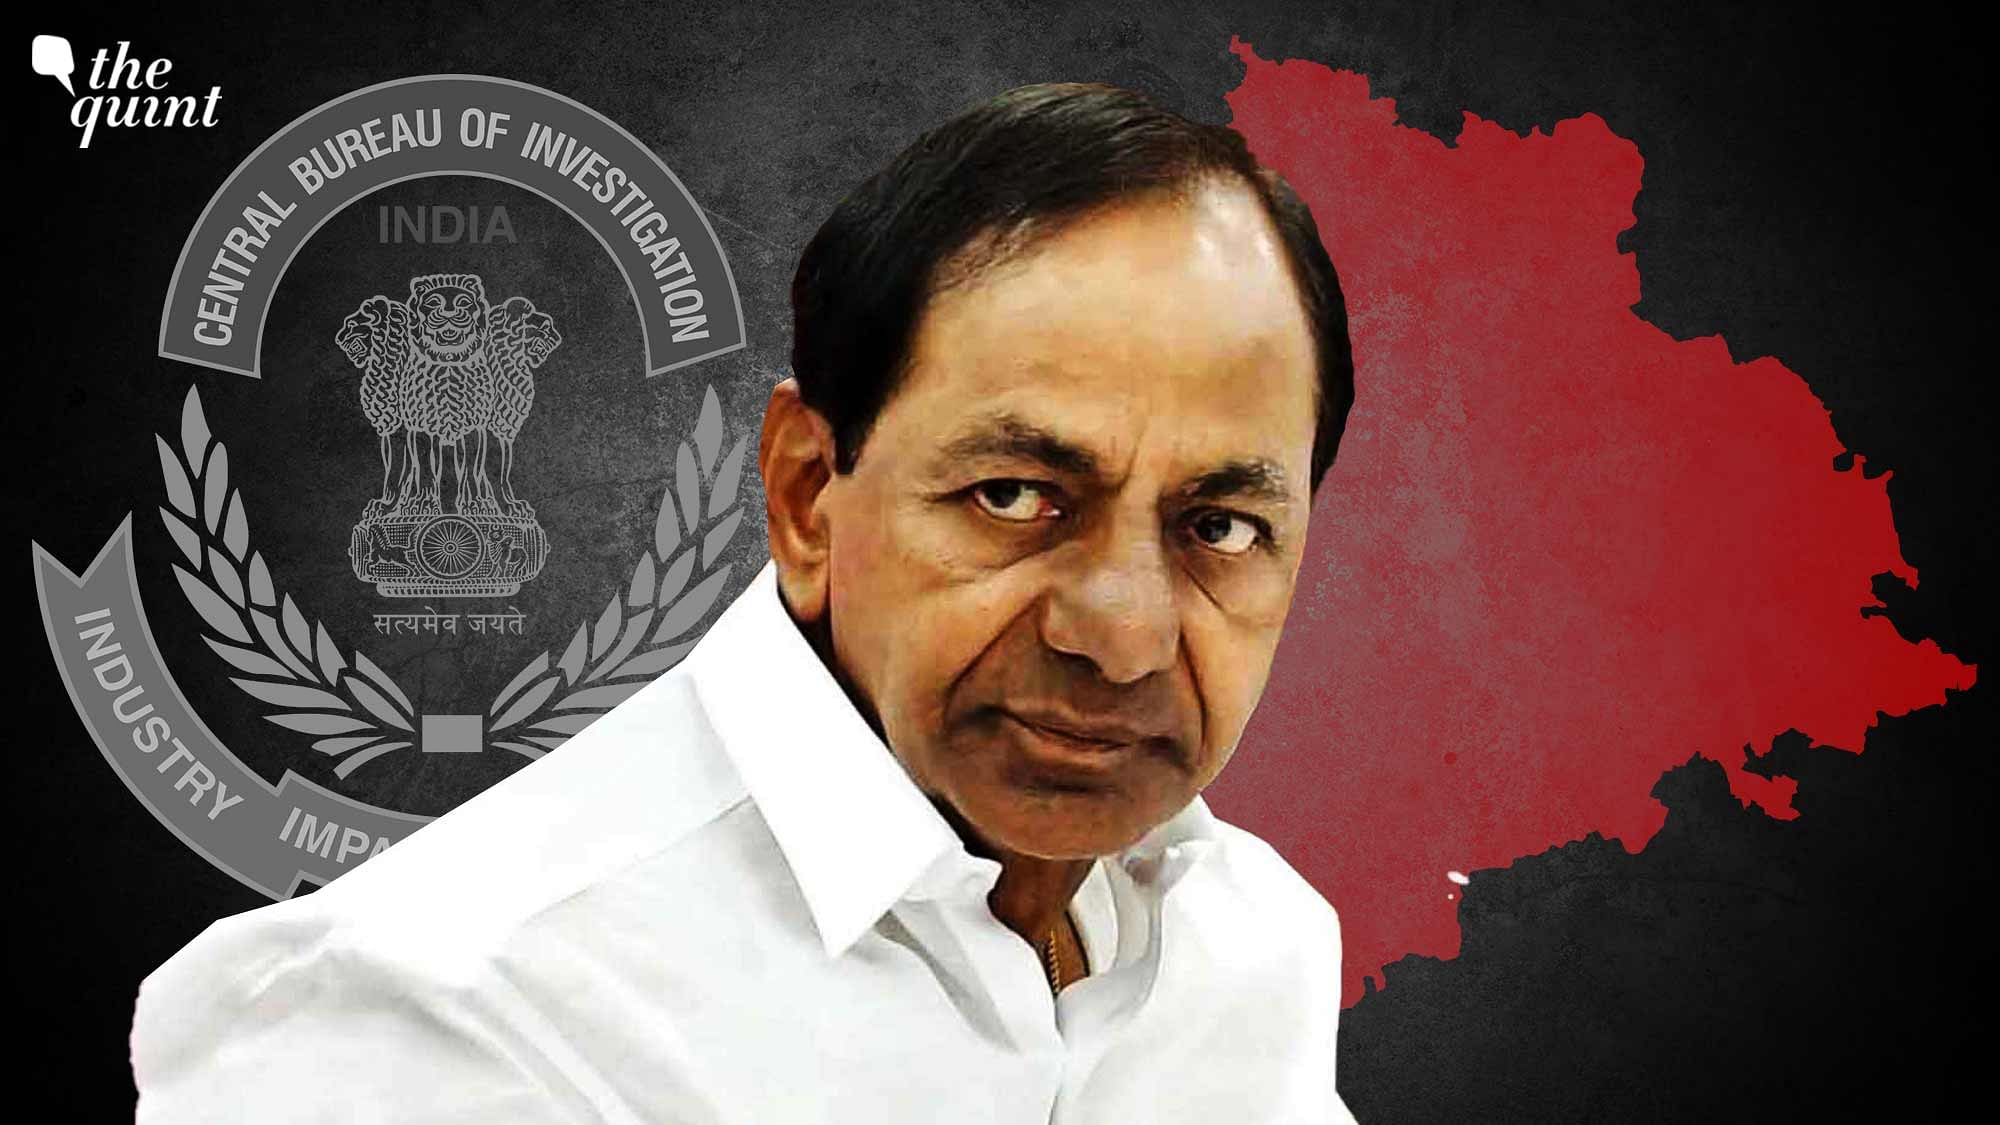 <div class="paragraphs"><p>Telangana has withdrawn general consent to the Central Bureau of Investigation (CBI), barring the agency from probing cases in the state without the government's permission.</p></div>